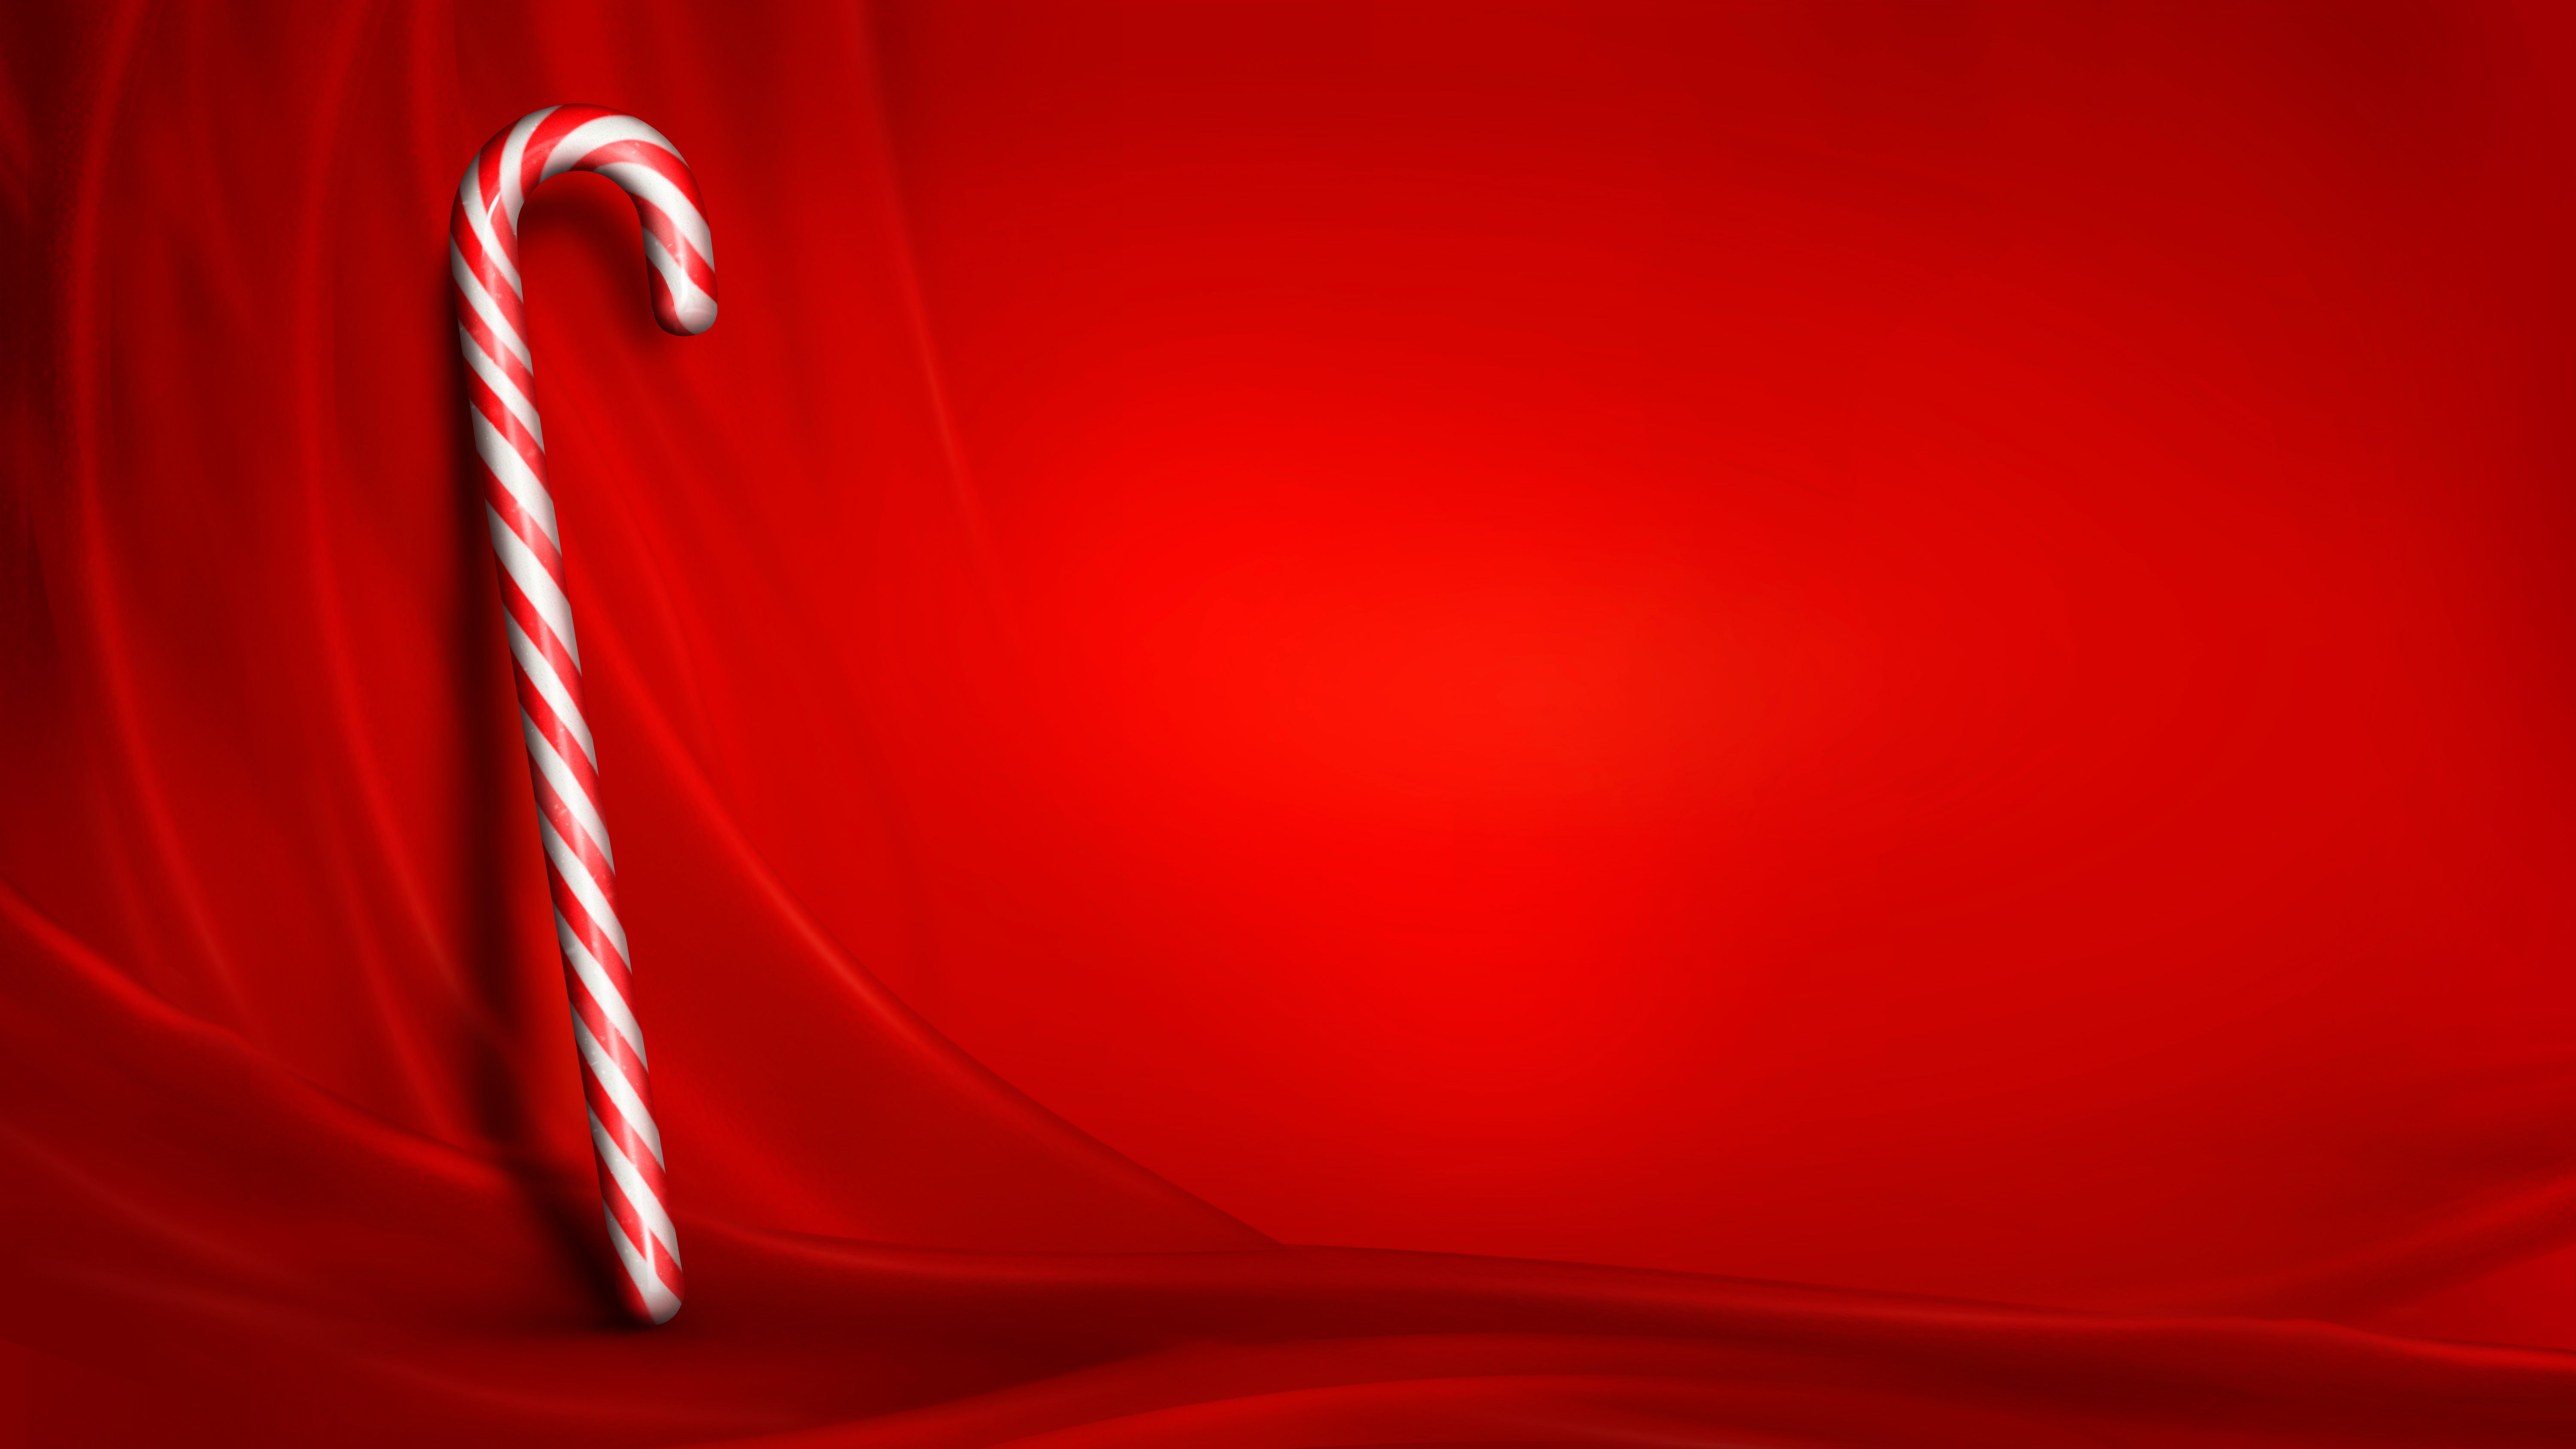 Christmas Red Background With Candy Cane Quality Image And Transparent PNG Free Clipart